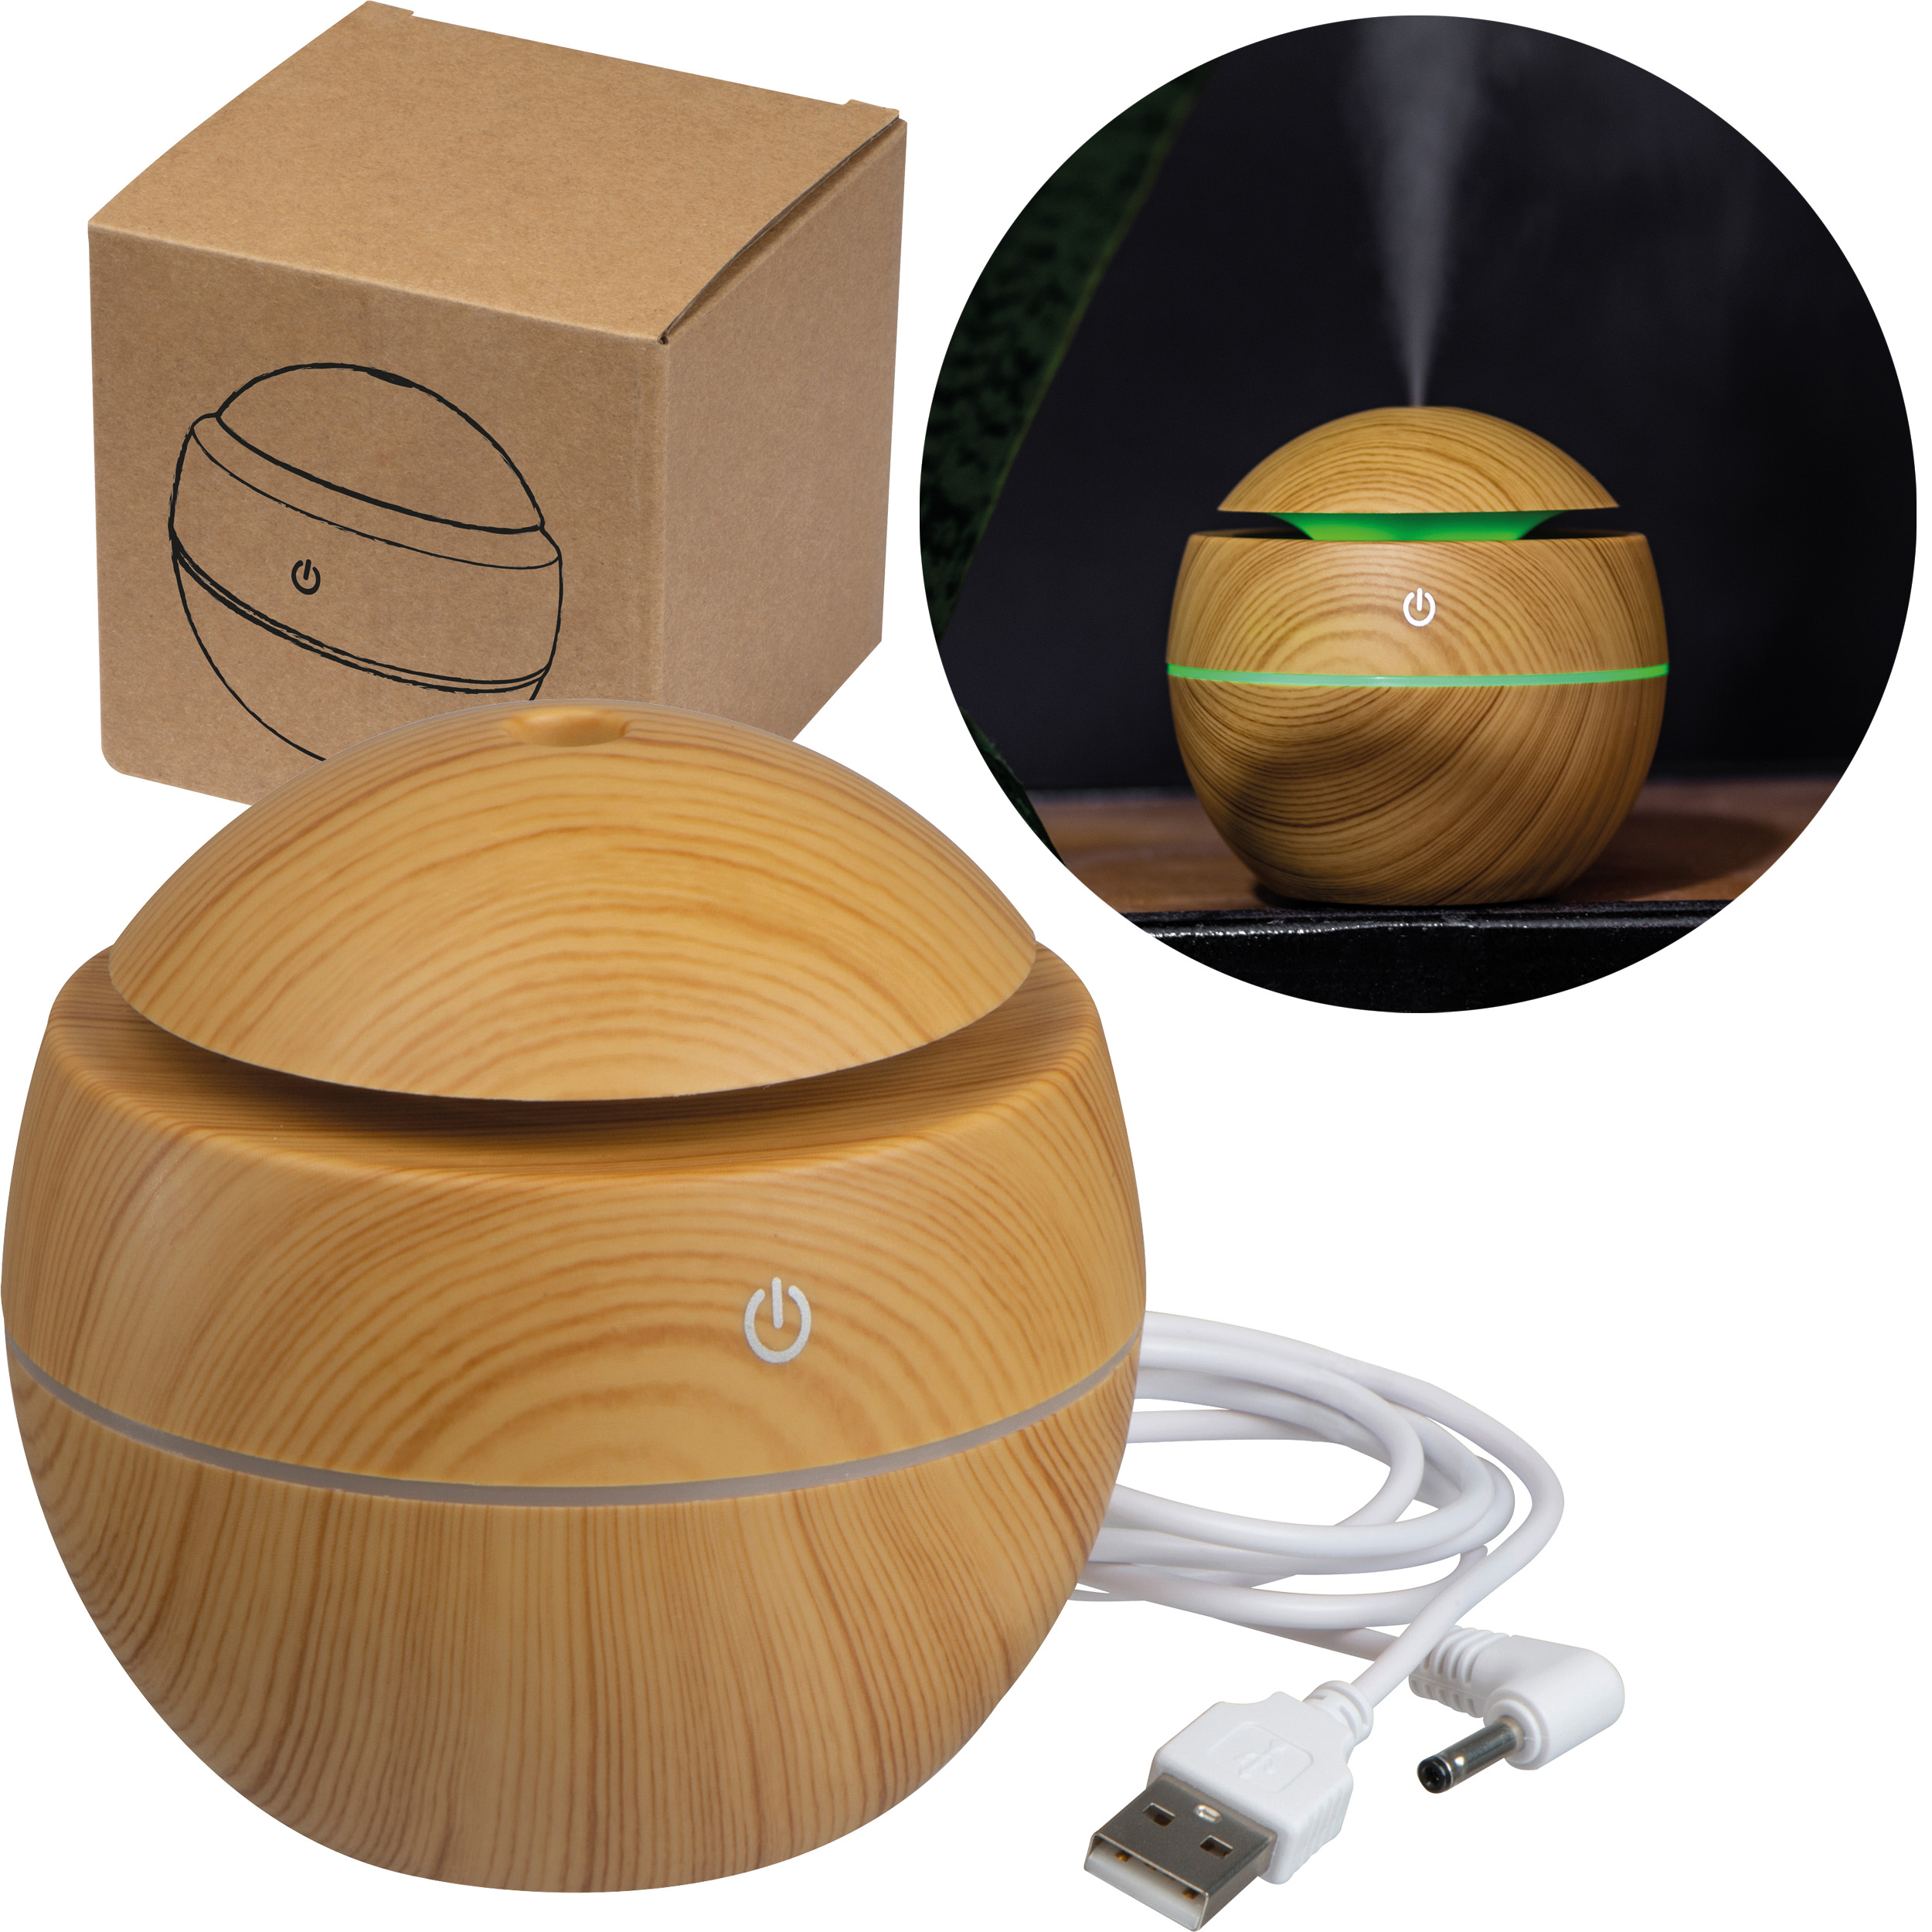 Aroma humidifier with color changing LED light